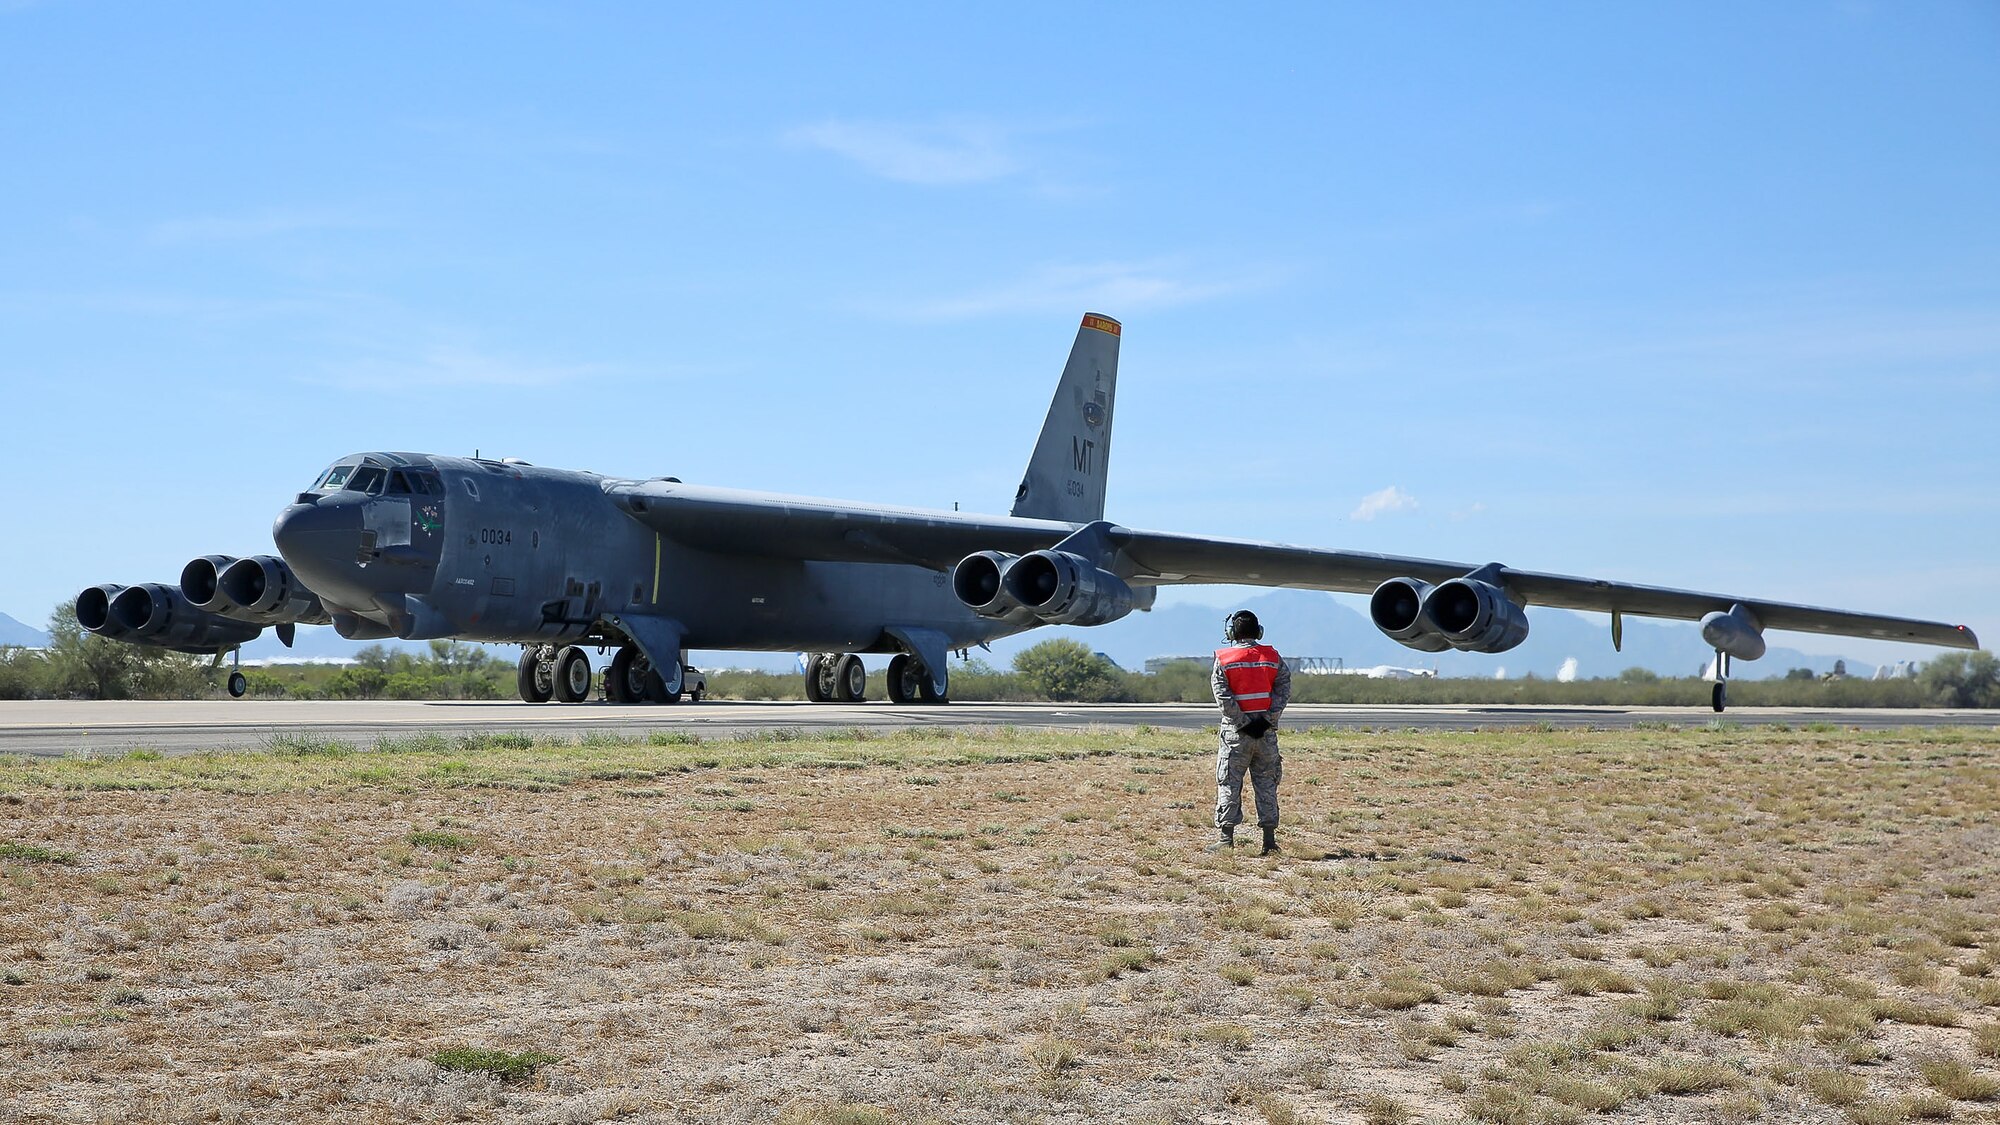 A B-52H Stratofortress, nicknamed "Wise Guy," taxis at Davis-Monthan Air Force Base, Ariz., May 14, 2019. The aircraft had been sitting at the 309th Aerospace Maintenance and Regeneration Group at Davis-Monthan AFB, Arizona, since 2008. It is being returned to service to replace a B-52 lost during takeoff in 2016. (U.S. Air Force photo by Col. Jennifer Barnard)